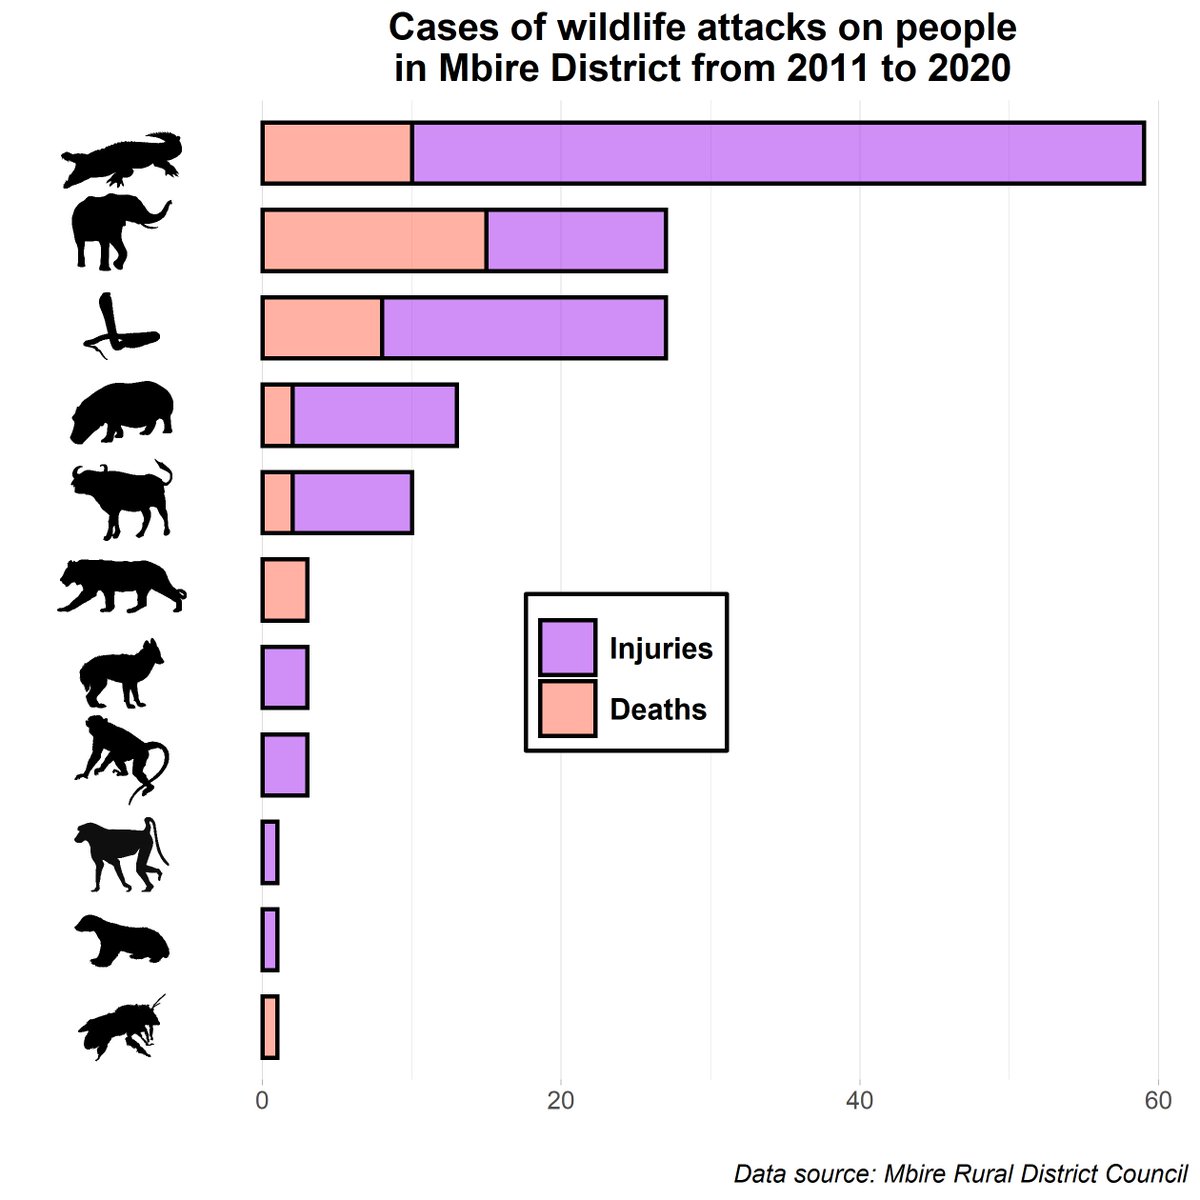 #crocodiles #elephants & #snakes 🐊🐘🐍 are the wild animals causing the most injuries & deaths in #Mbire, #ZambeziValley 🇿🇼.

#humanwildlifeconflicts #Rstats #ggplot2 @PhyloPic